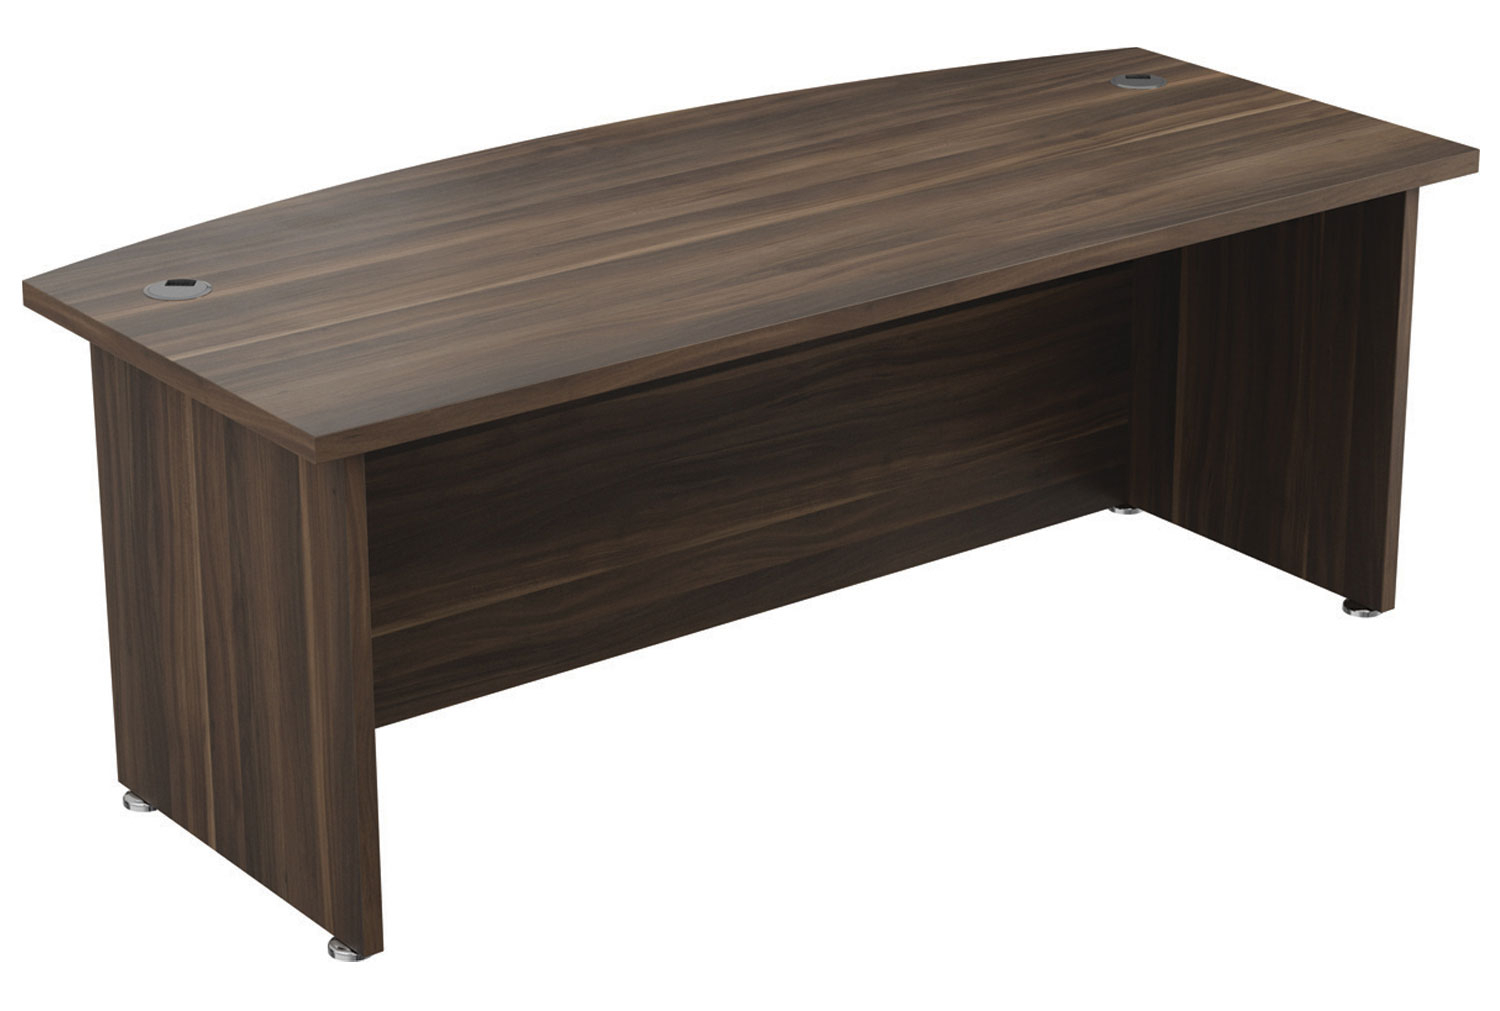 Viceroy Executive Bow Fronted Office Desk, Dark Walnut, Fully Installed